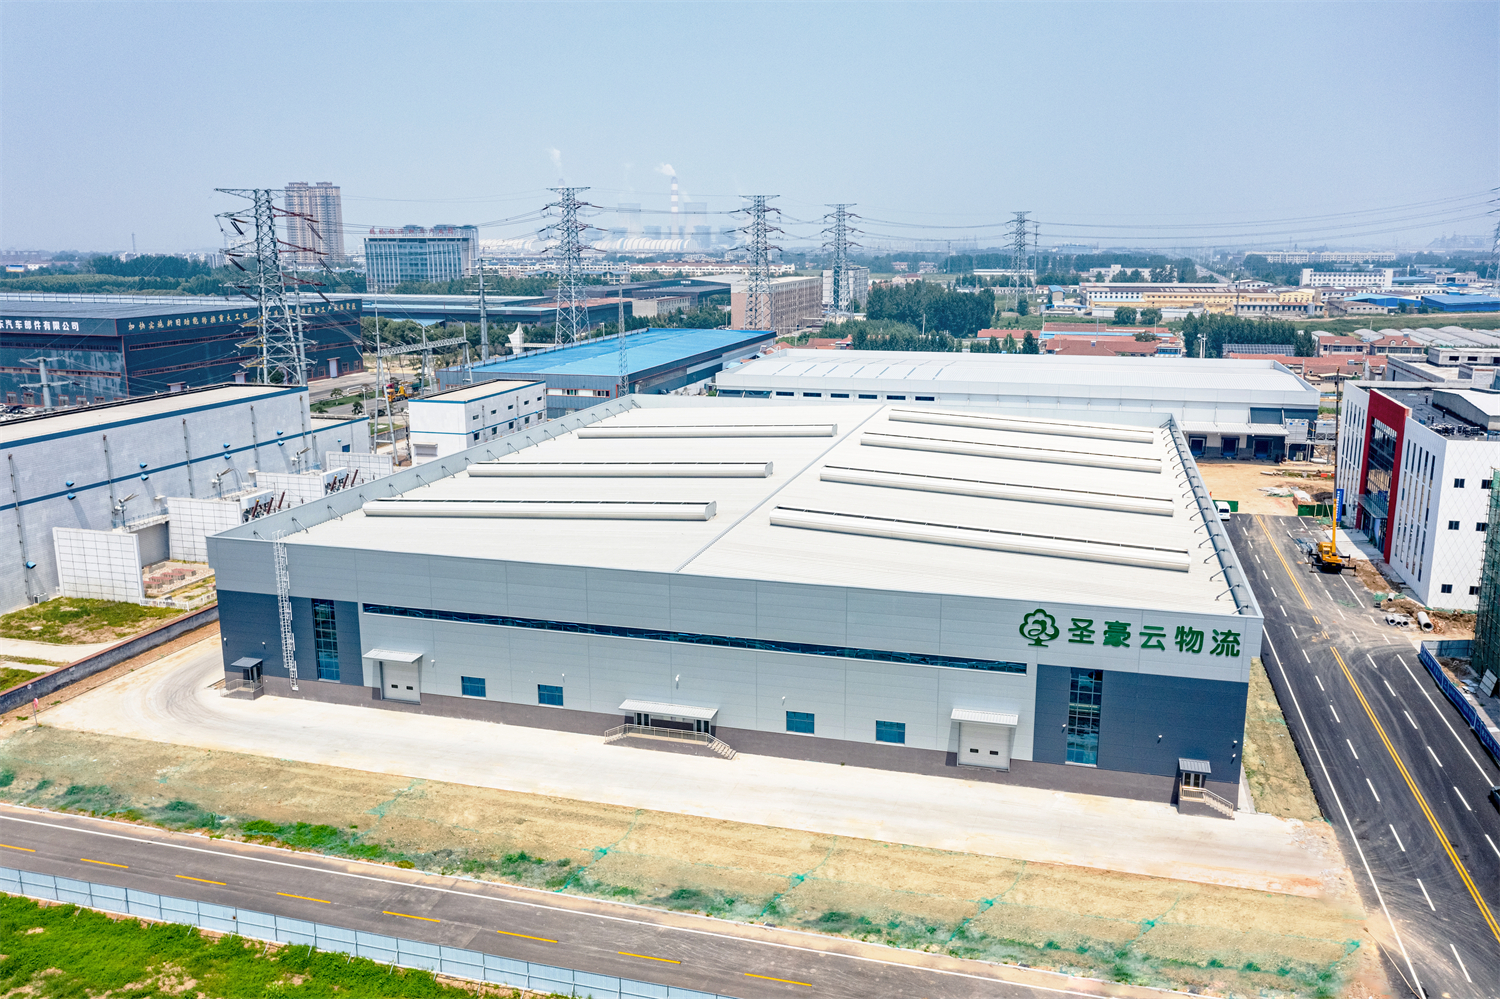 With equal emphasis on function and beauty, green building materials help the construction of logistics center(图3)